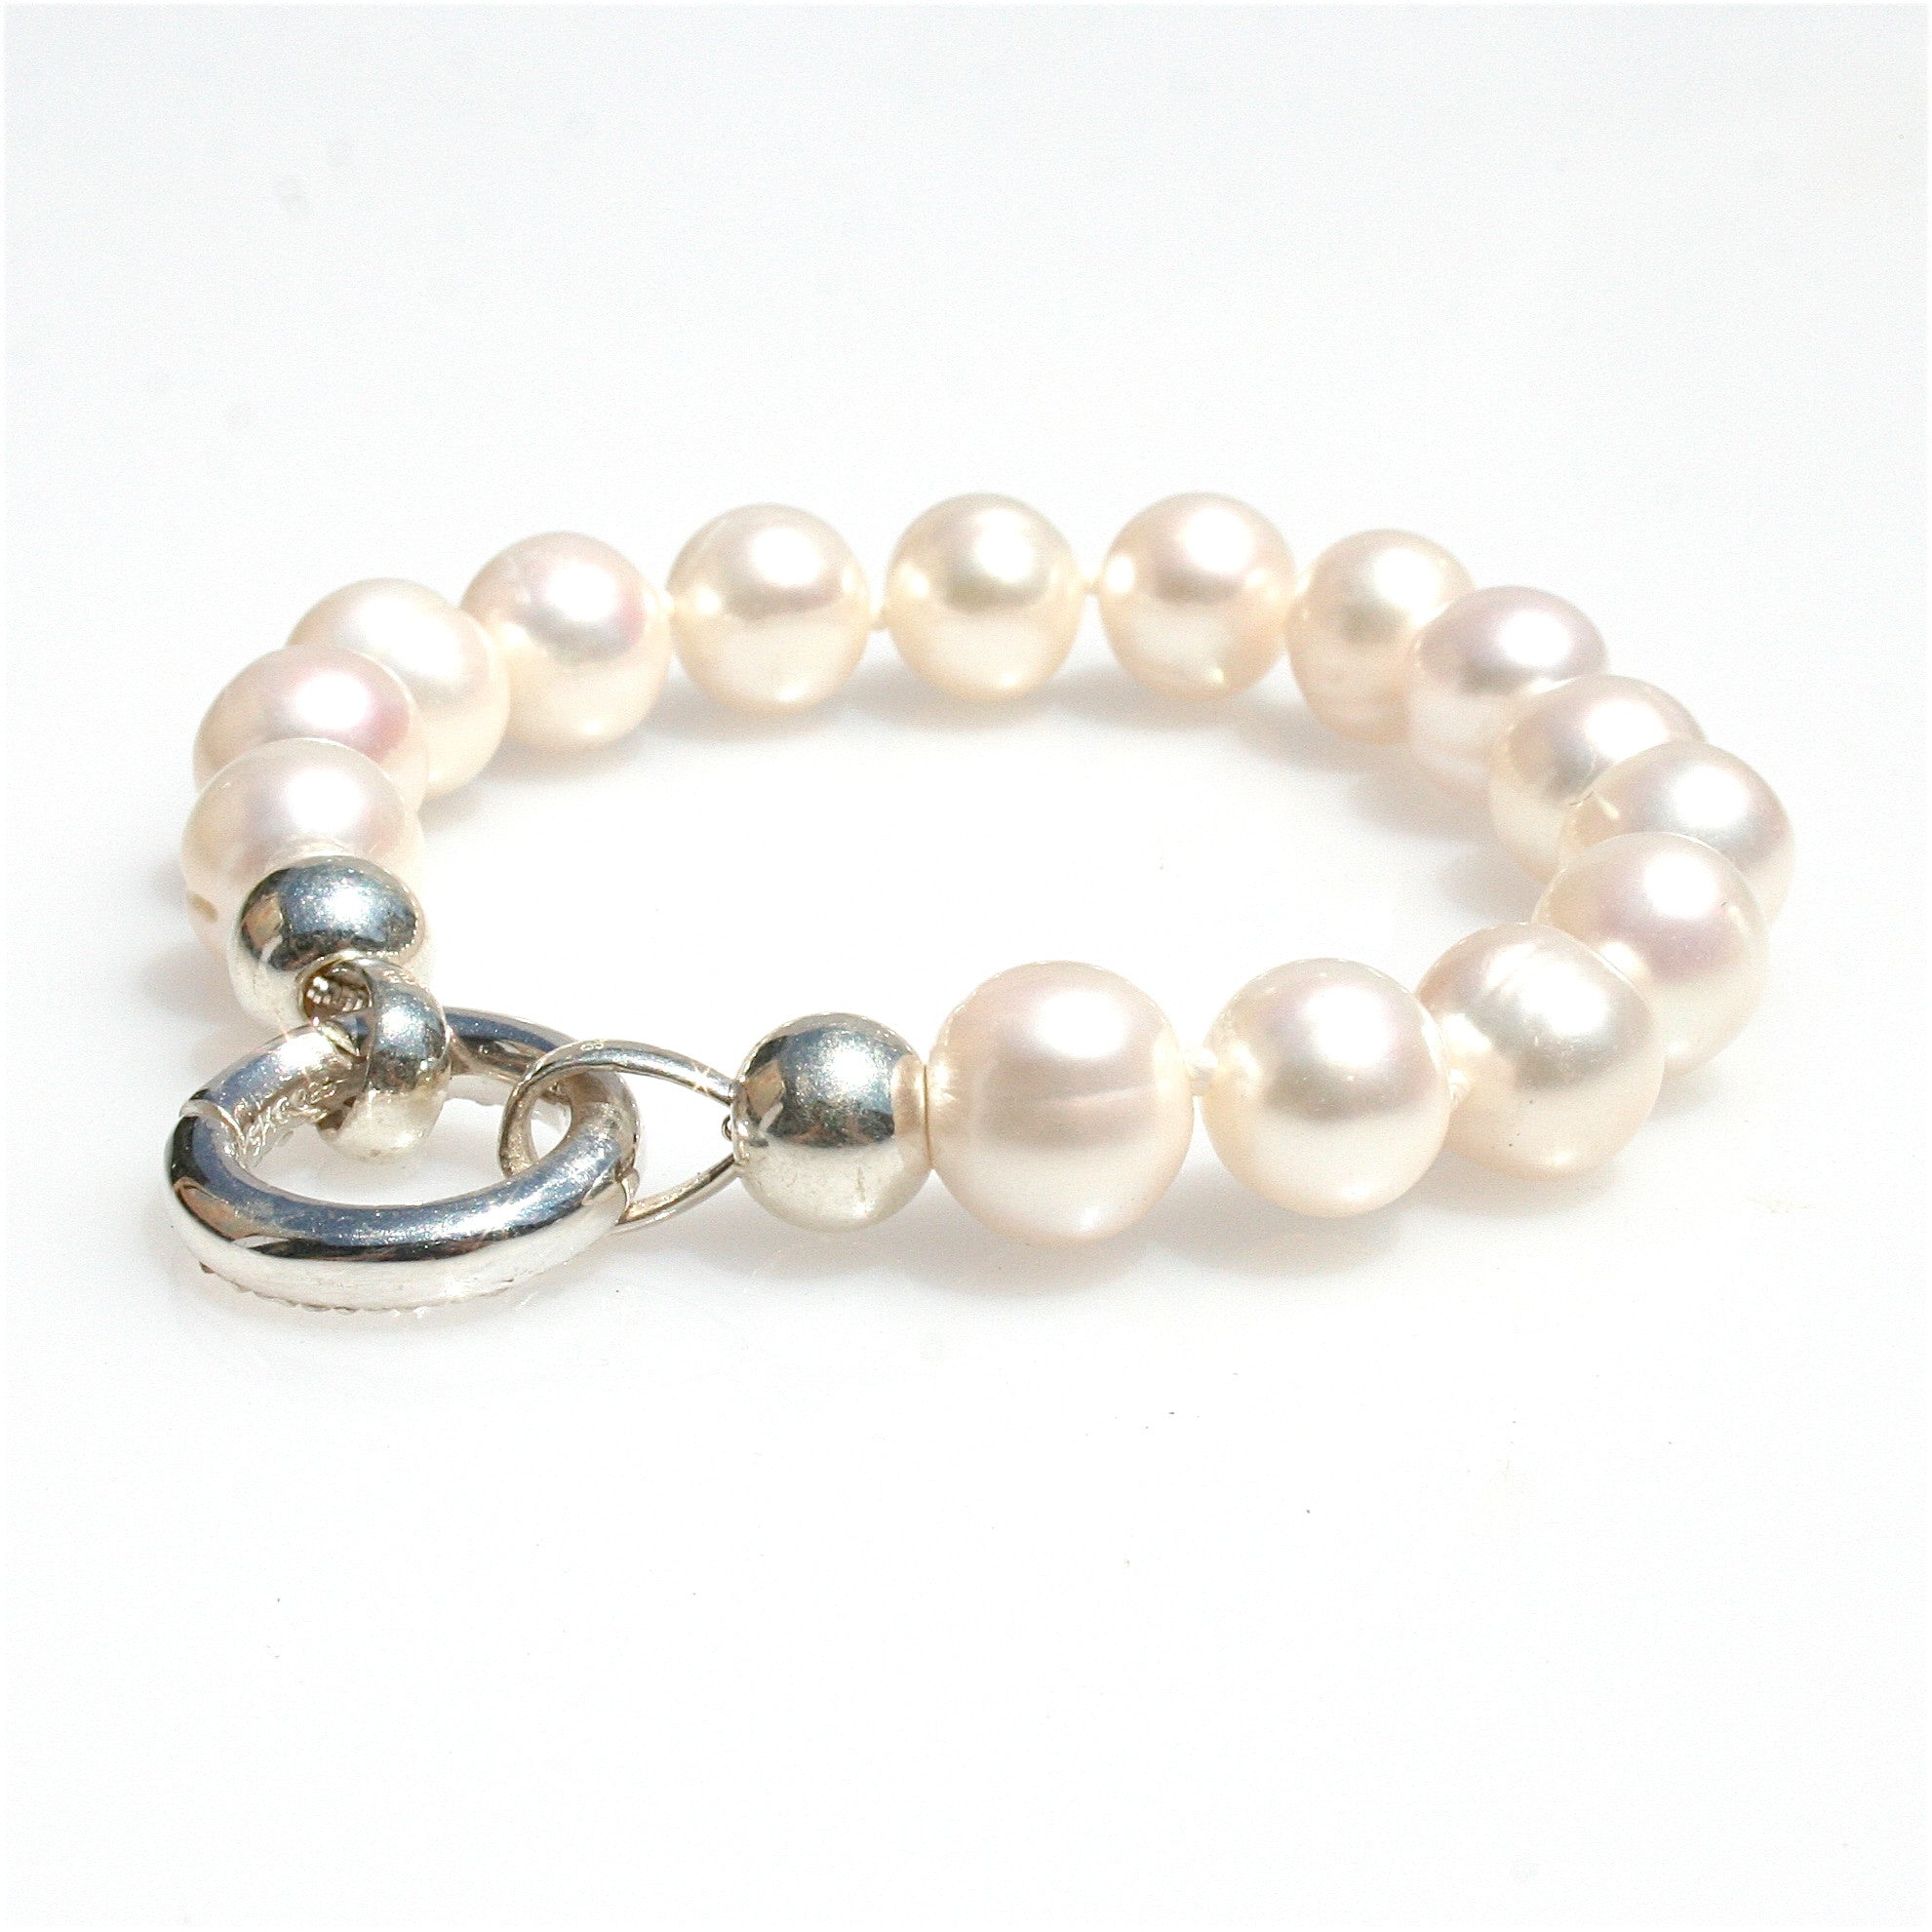 PEARL KNOTTED BRACELET WITH STERLING SILVER CLASP